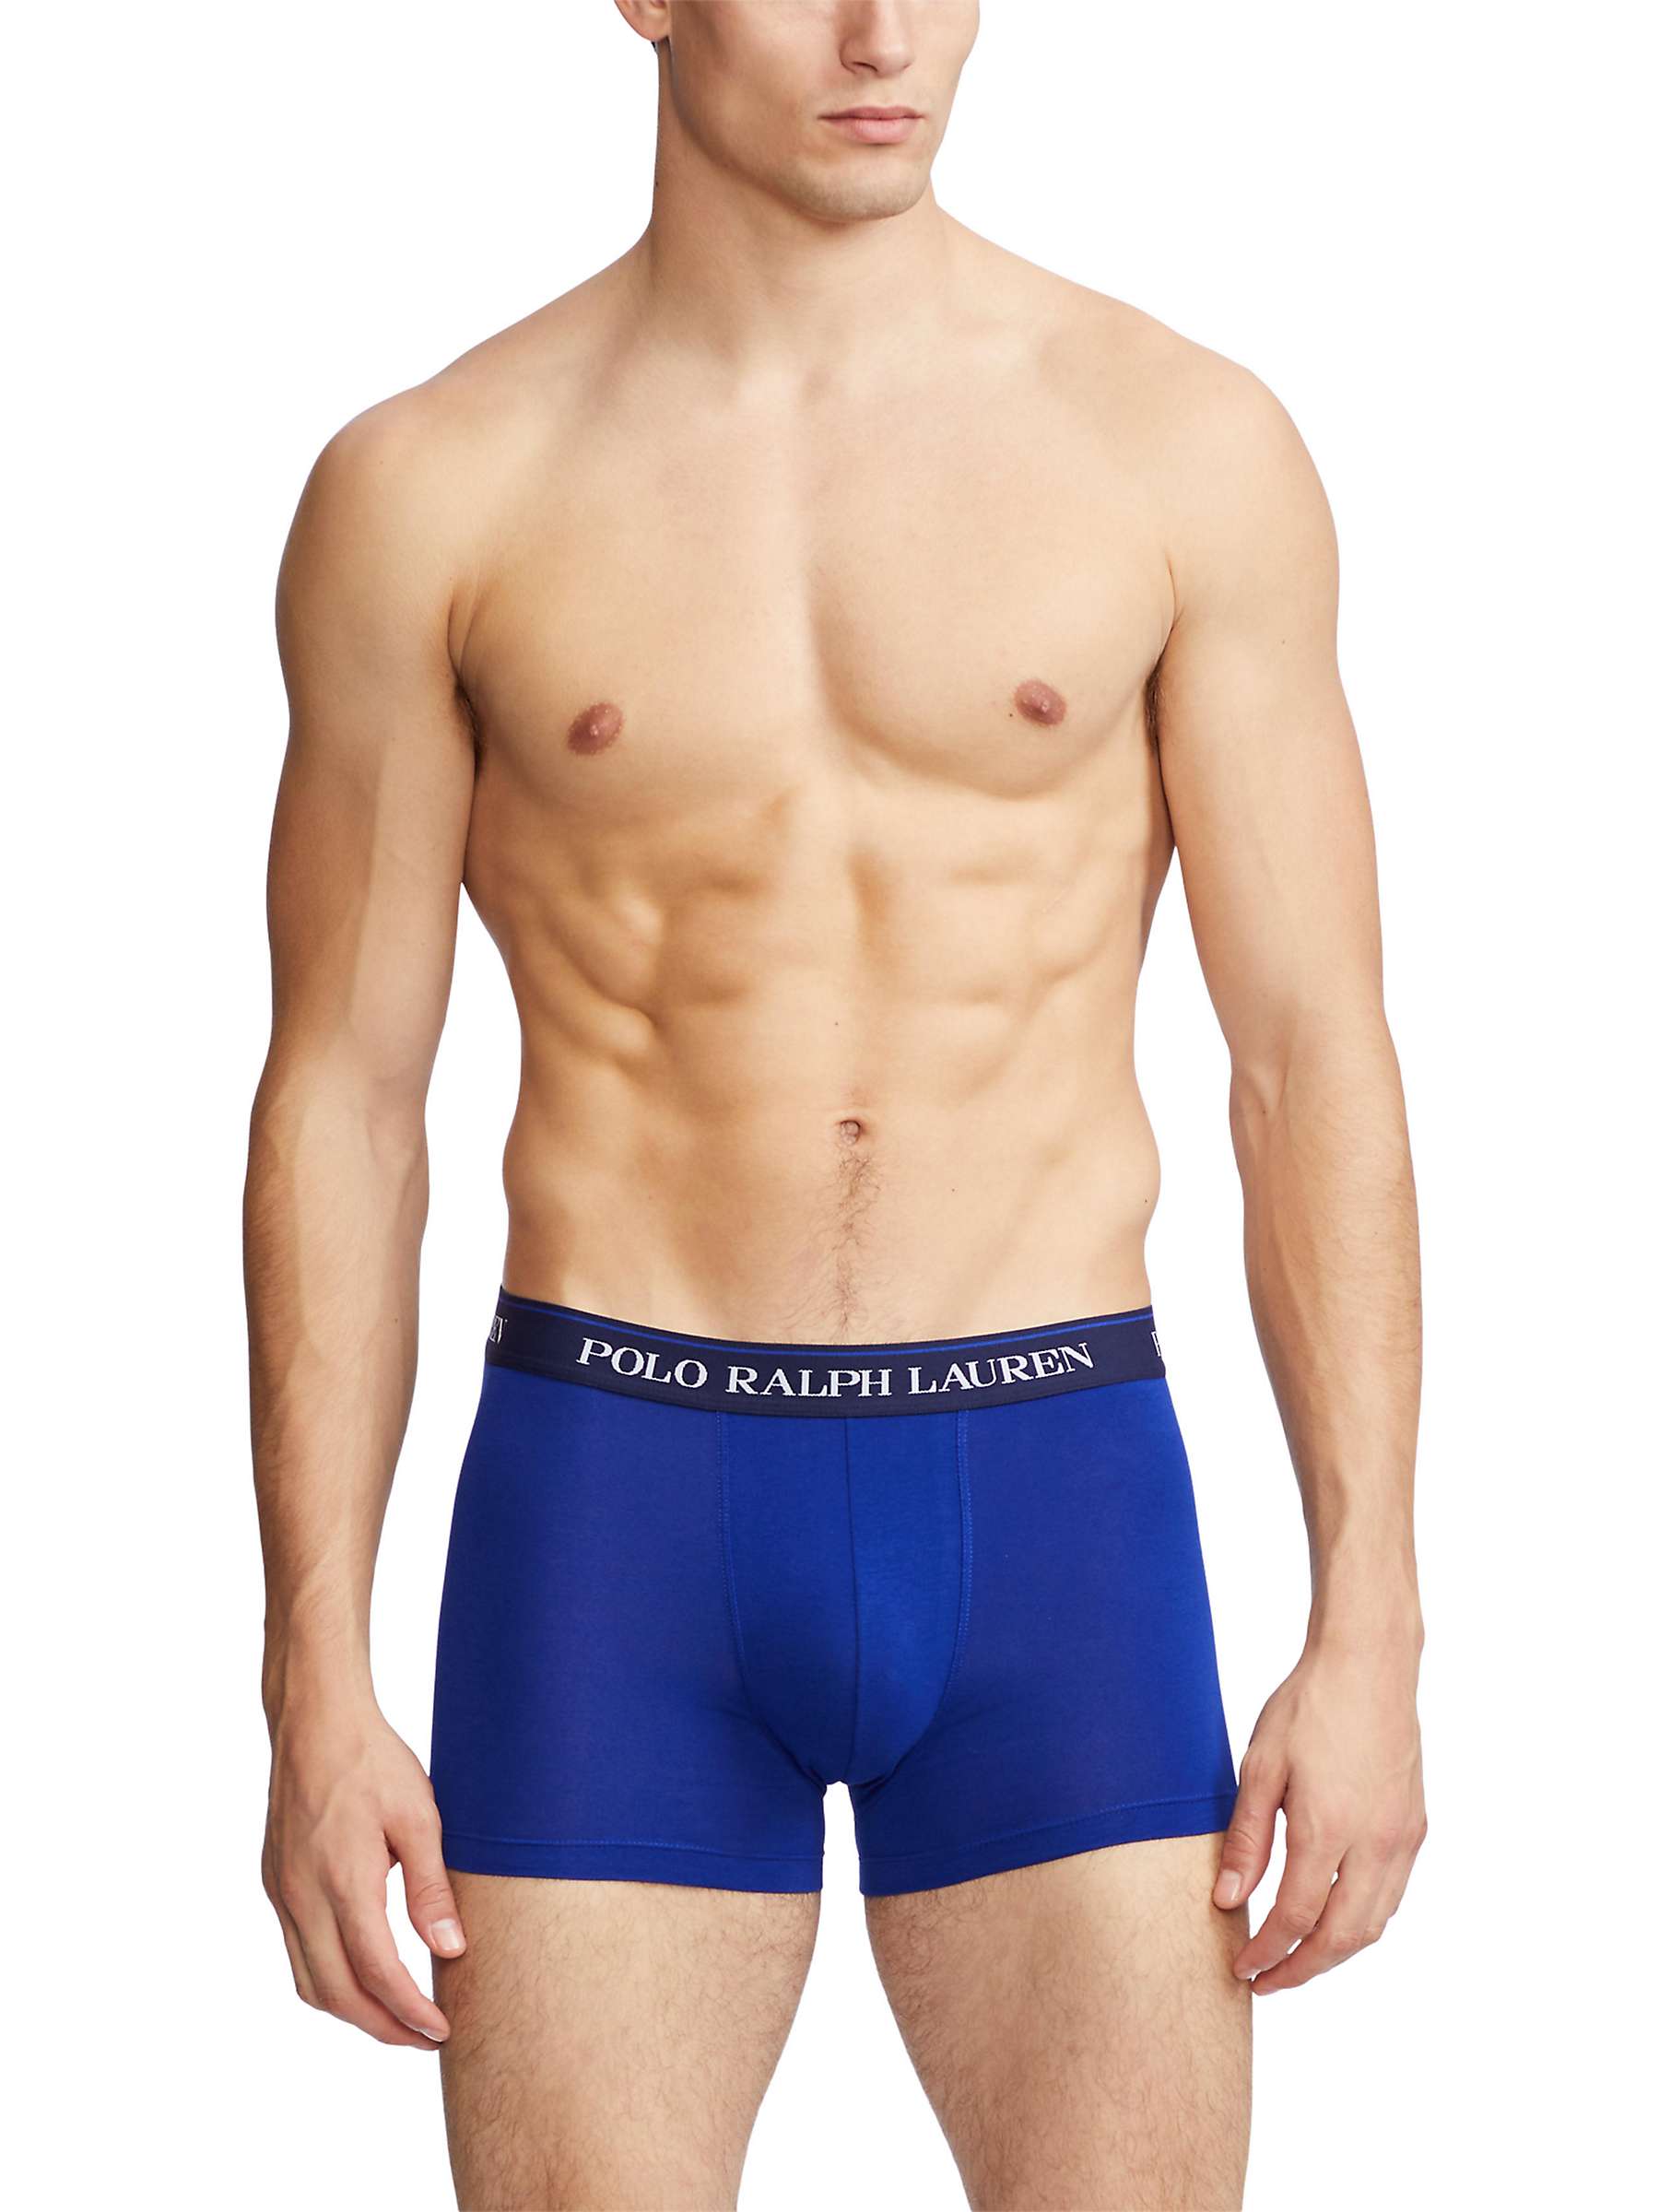 Buy Polo Ralph Lauren Cotton Stretch Trunks, Pack of 3, Blue/Red Multi Online at johnlewis.com